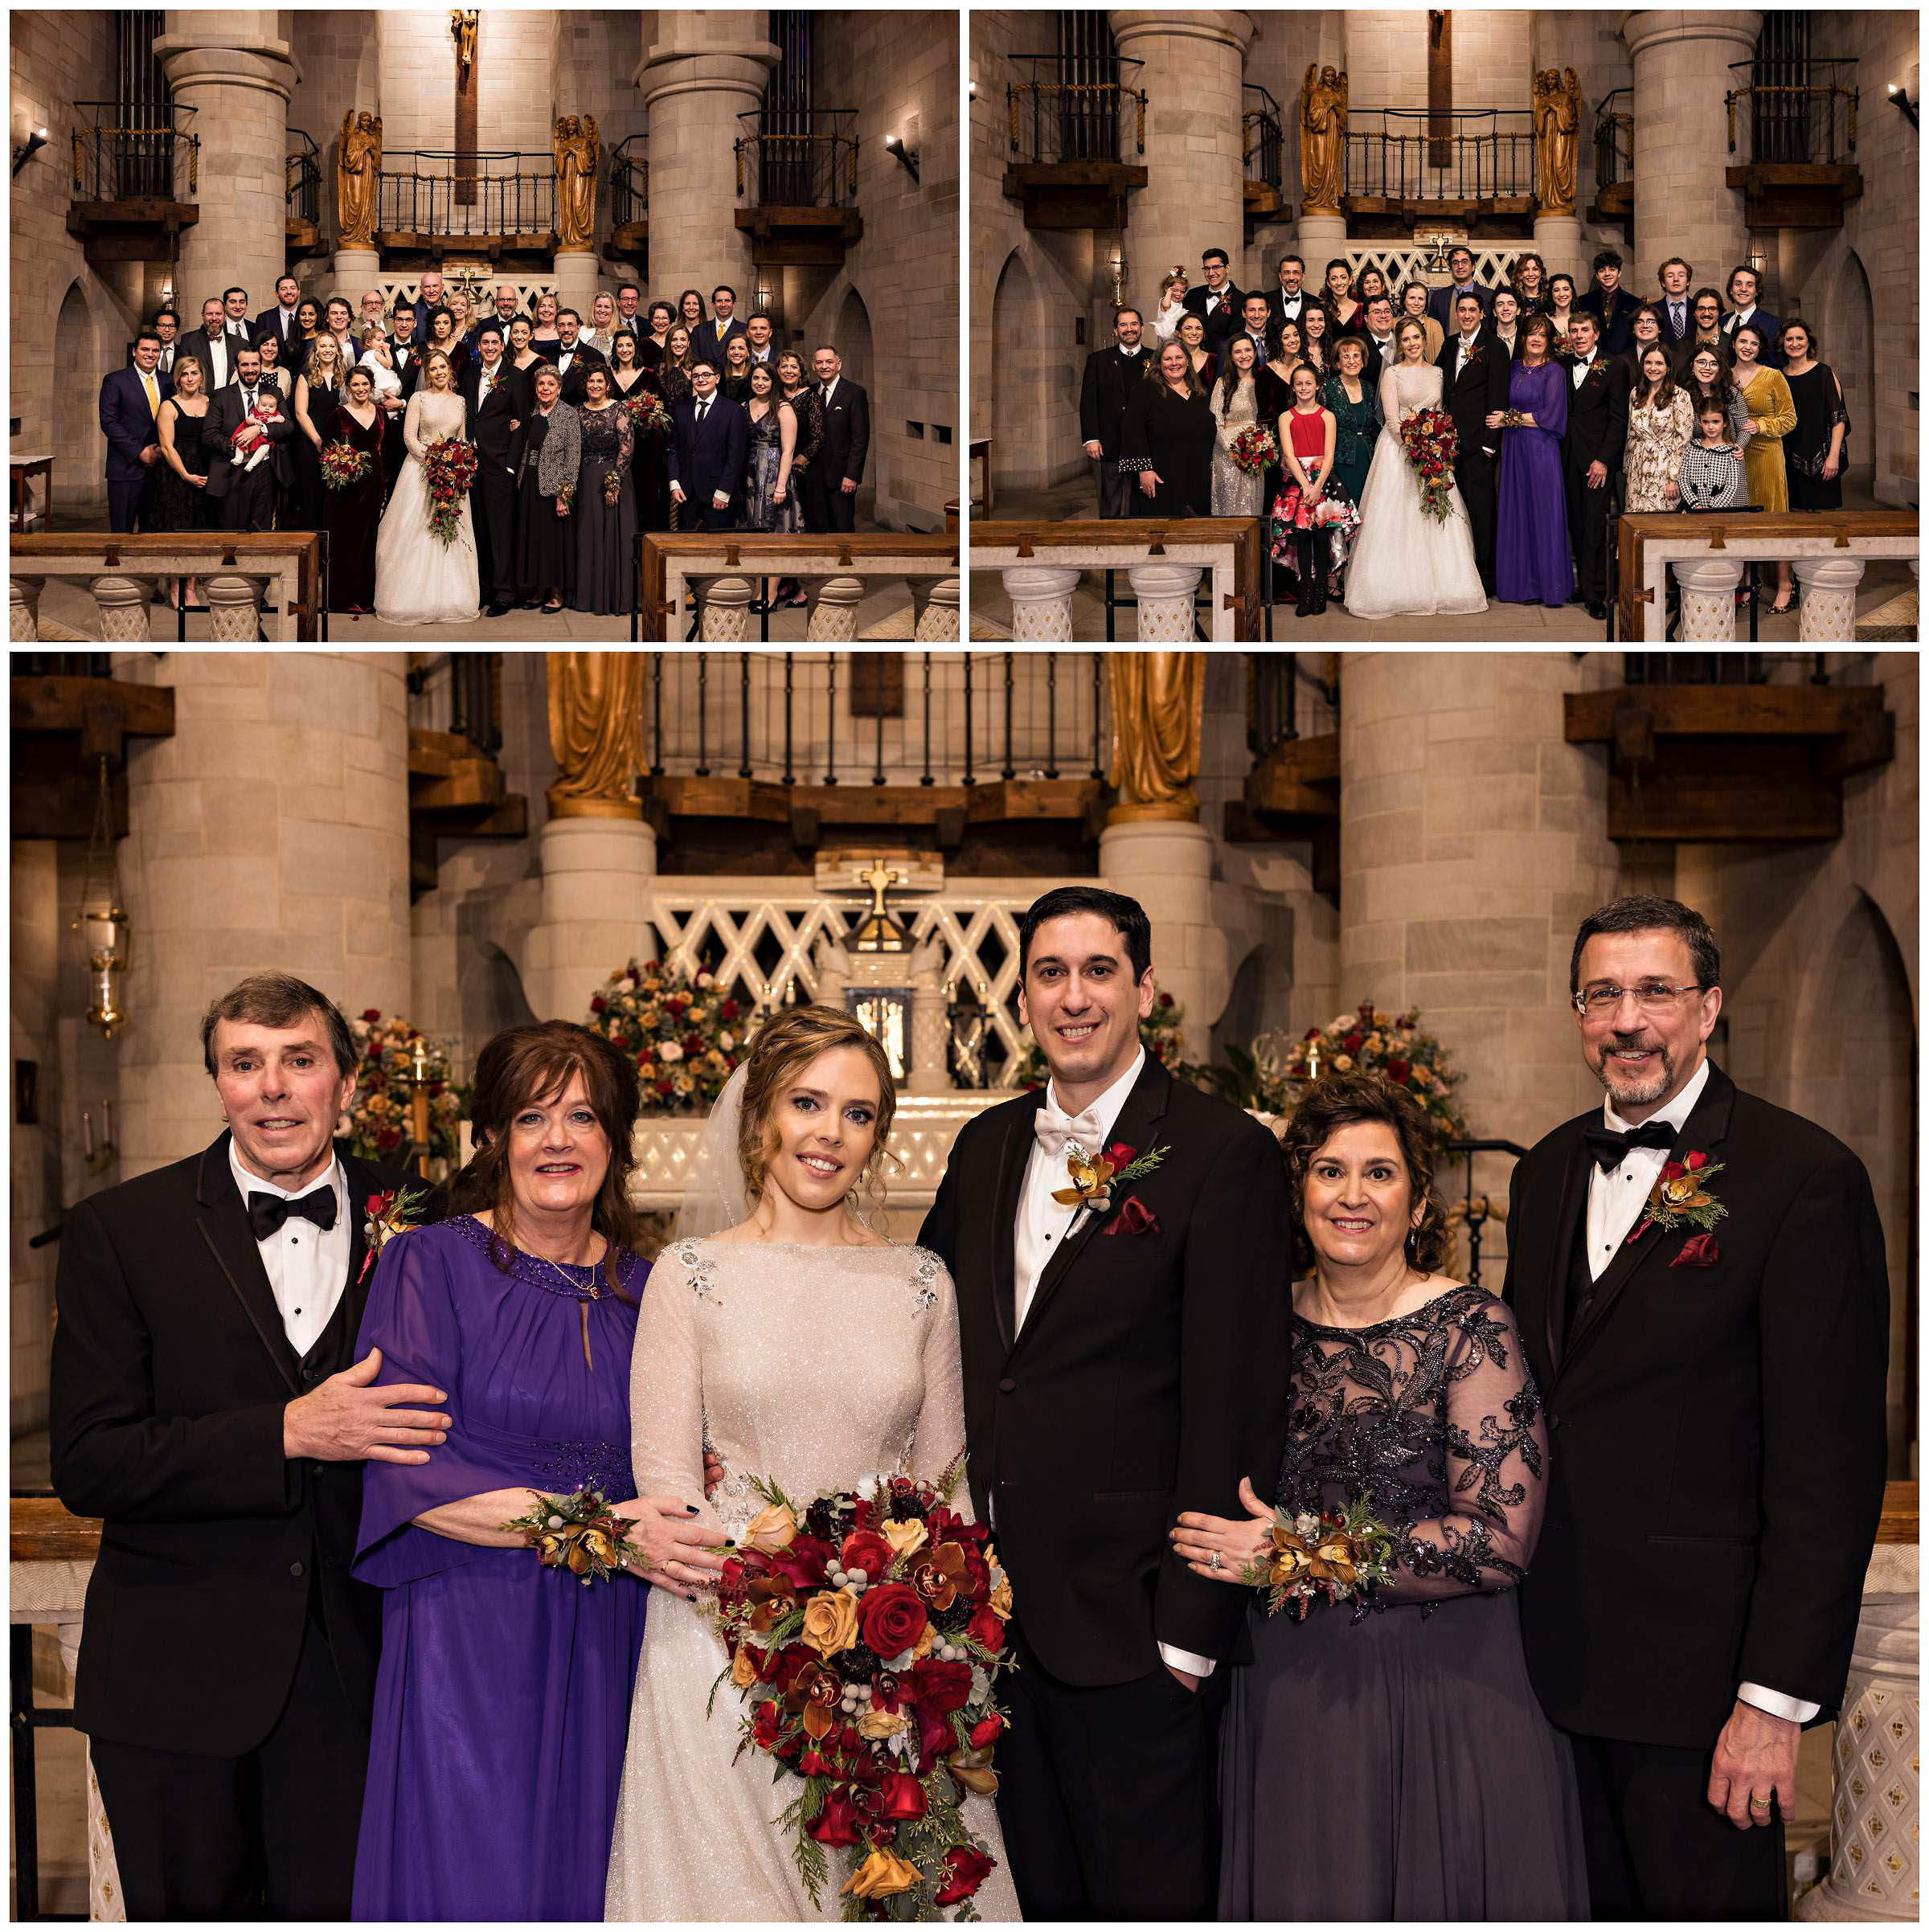 Bride and groom family formal photos at the church by Detroit Wedding Photographer Michele Maloney